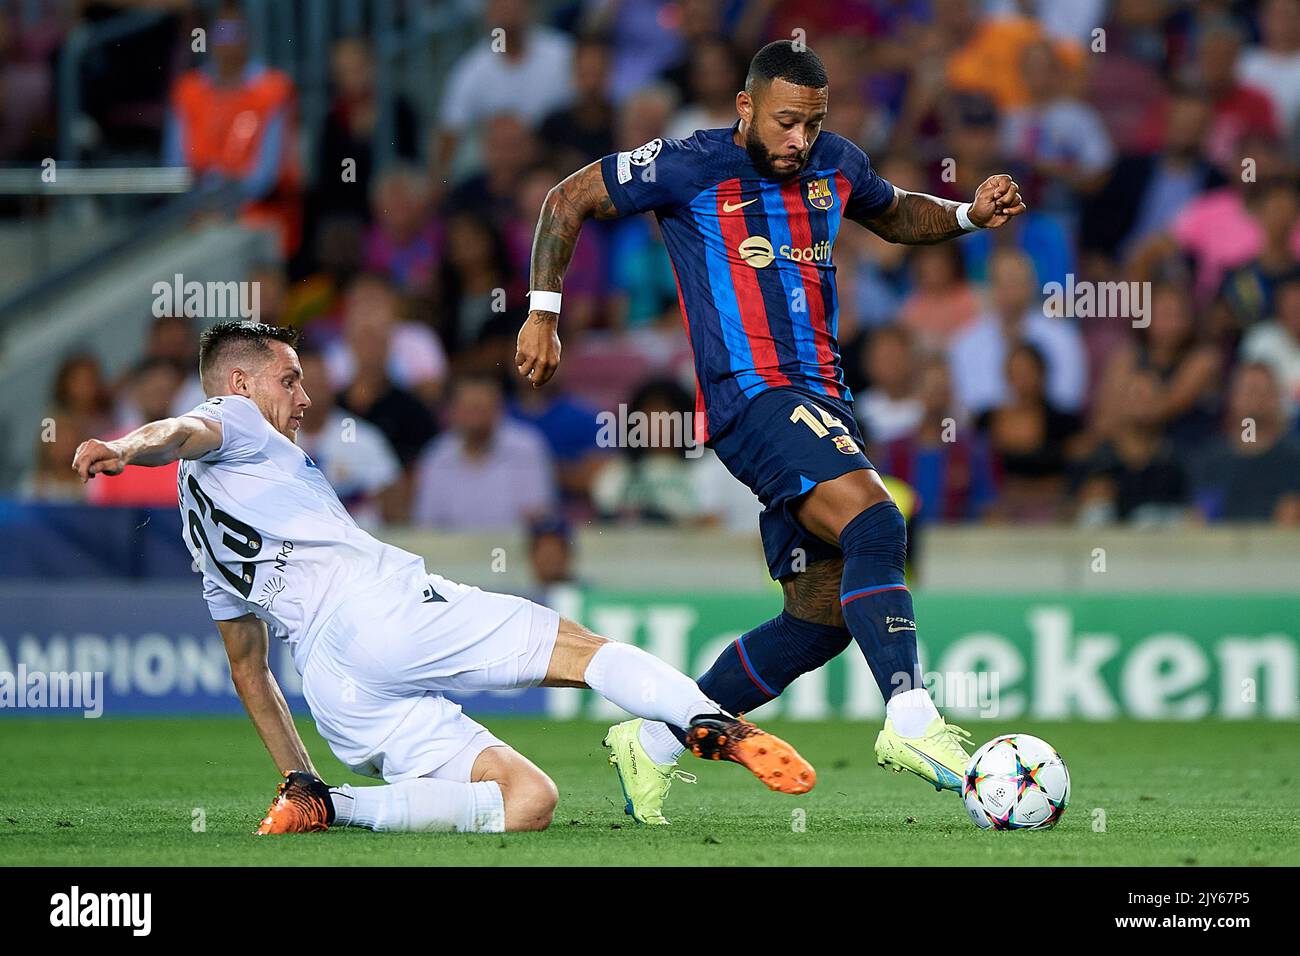 Barcelona. 7th Sep, 2022. Memphis Depay (R) of Barcelona vies with Lukas Kalvach of Viktoria Plzen during the UEFA Champions League Group C match between FC Barcelona and FC Viktoria Plzen in Barcelona, Spain, on Sept. 7, 2022. Credit: Xinhua/Alamy Live News Stock Photo